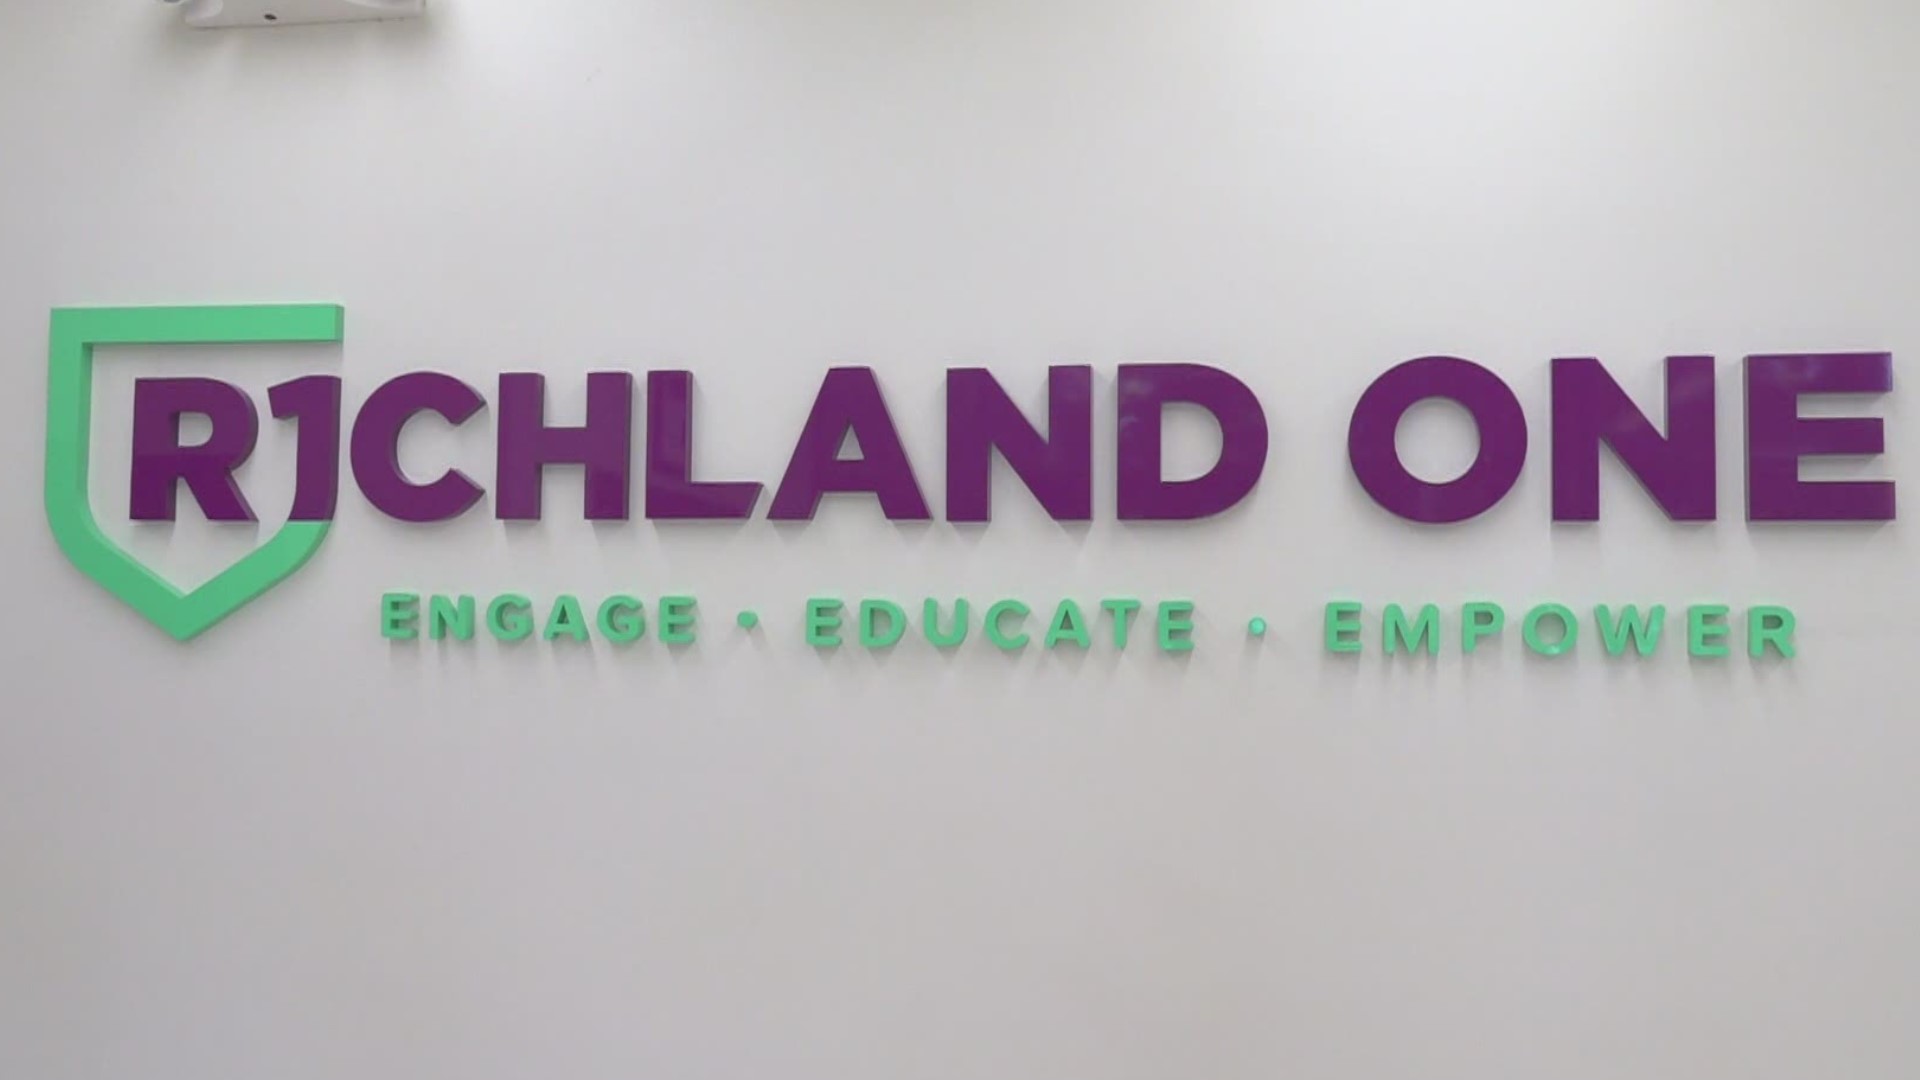 Because of the decline in COVID-19 rates in Richland County, the district plans to have all students back full-time by March 29.